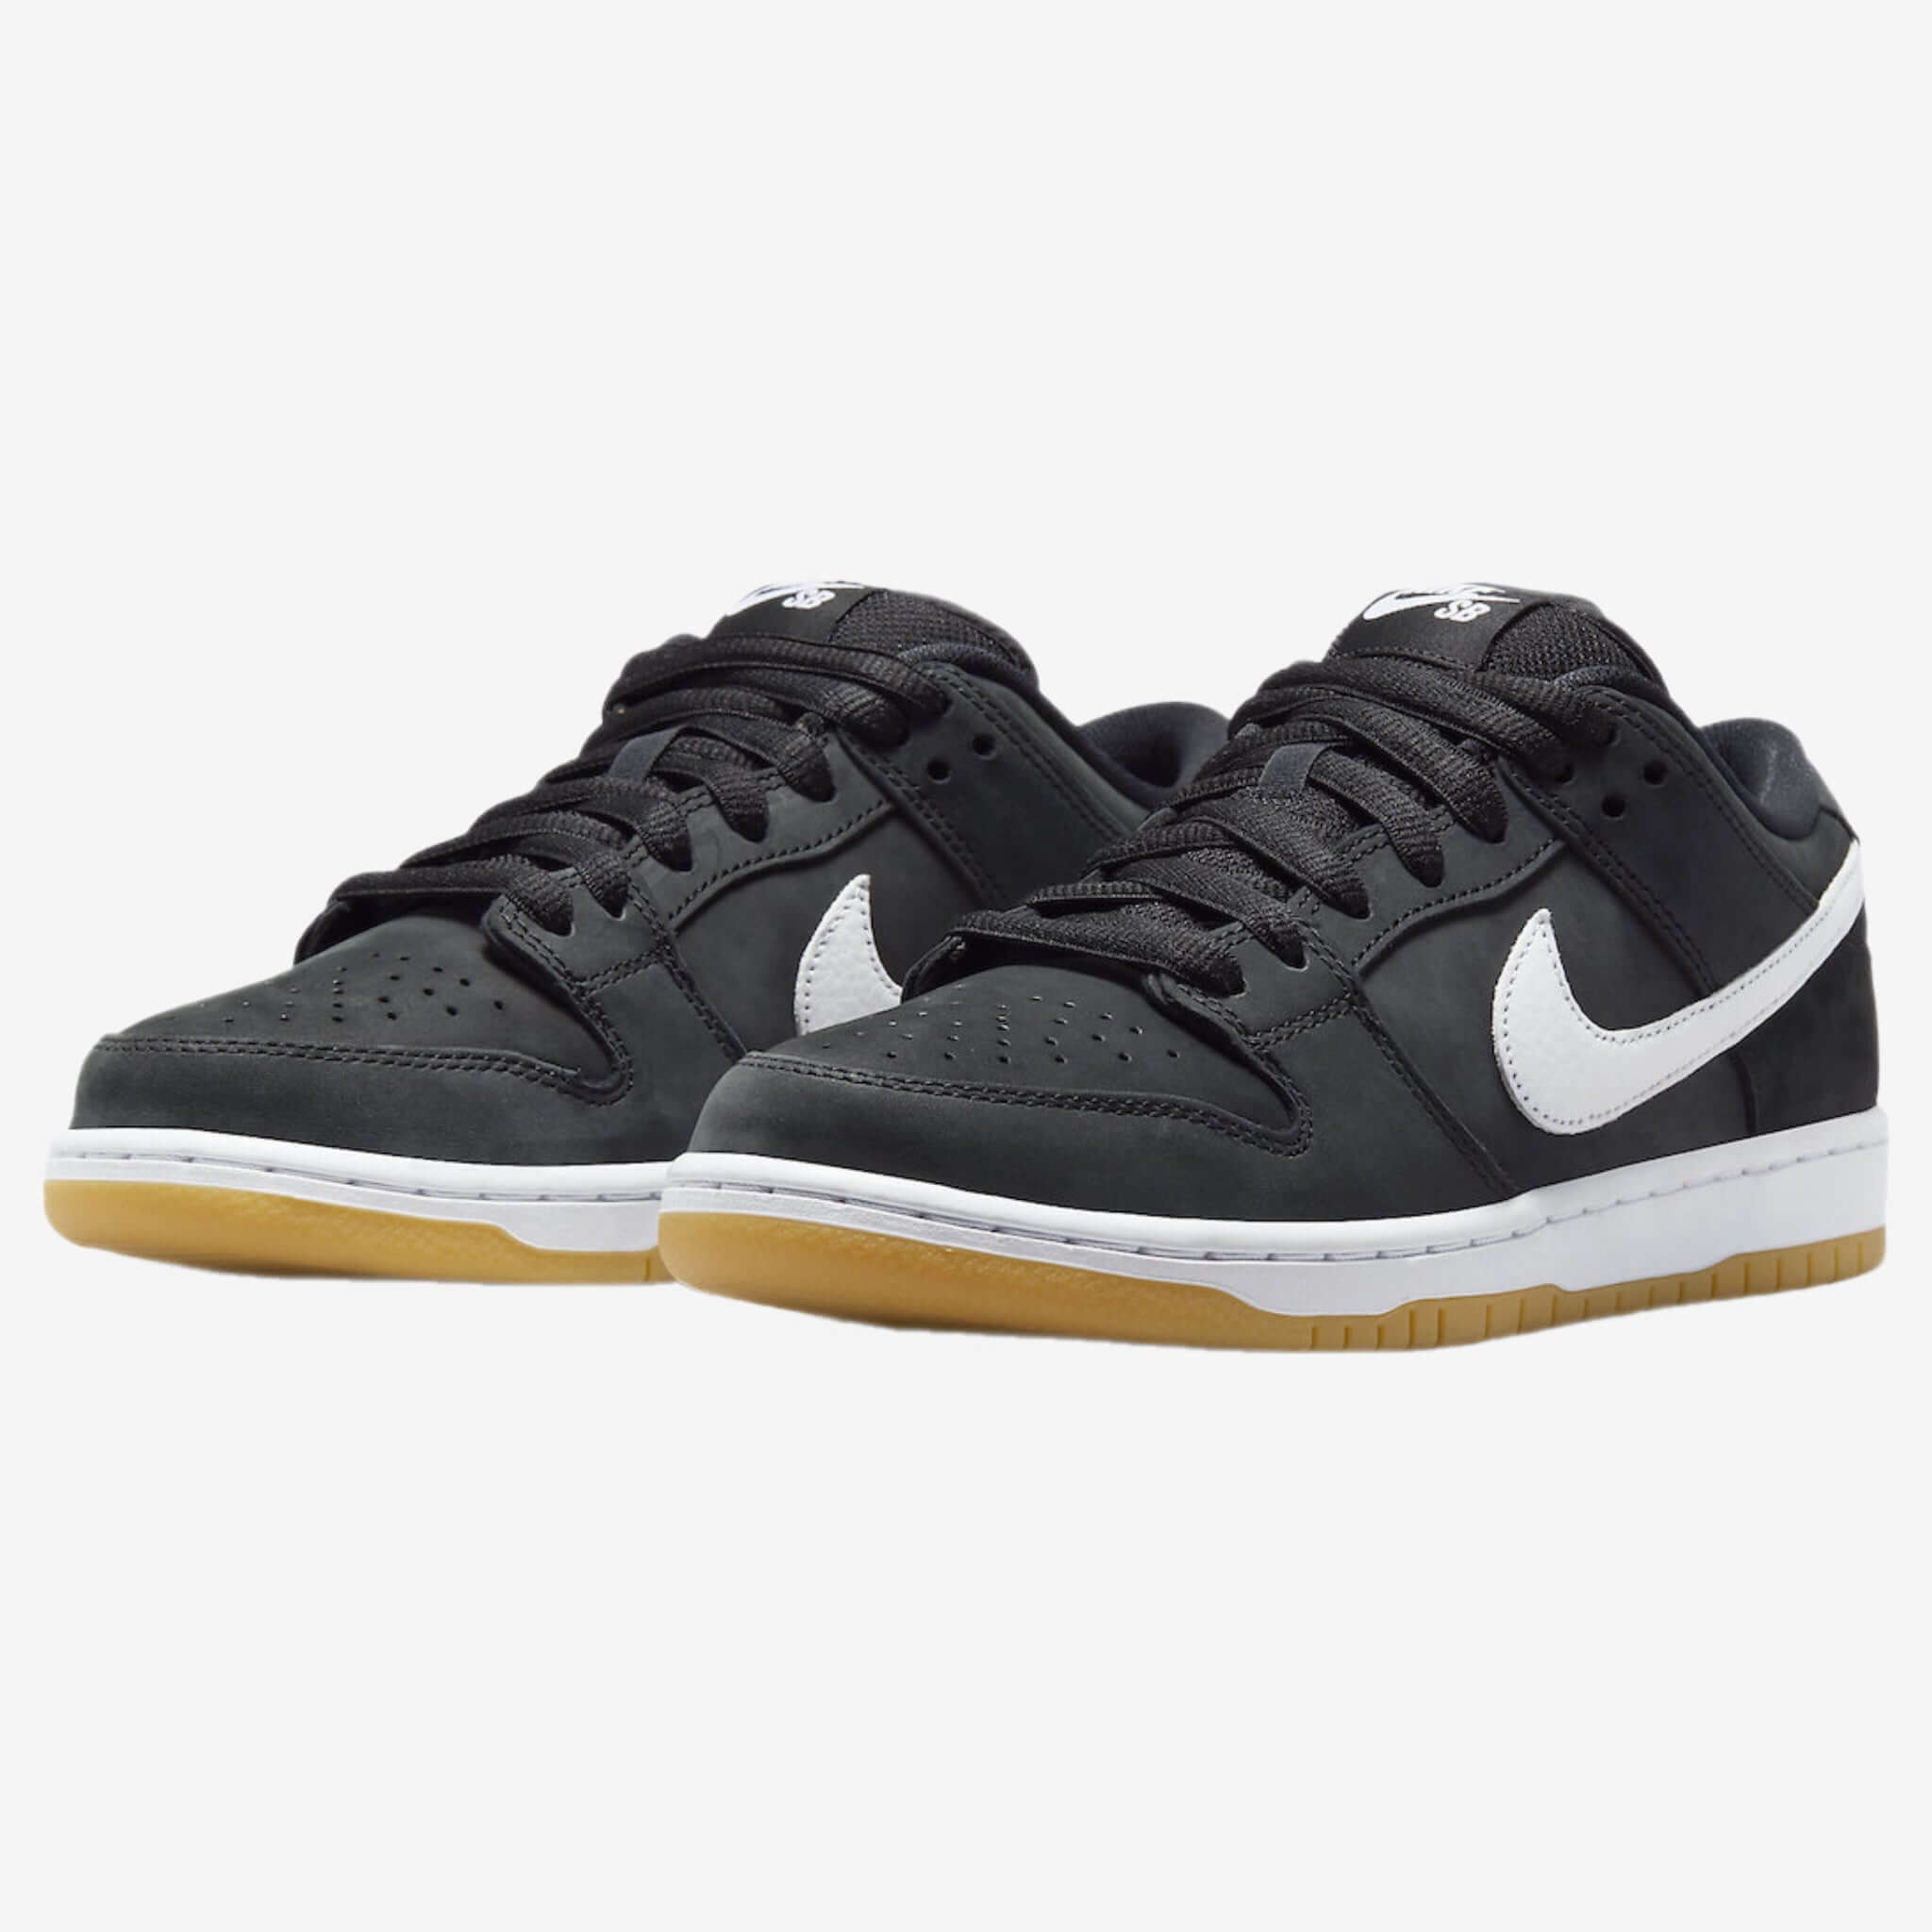 Nike SB Dunk Low “Black/Gum” | | $199.99 | $199.99 | $199.99 | Shoes | Marching Dogs